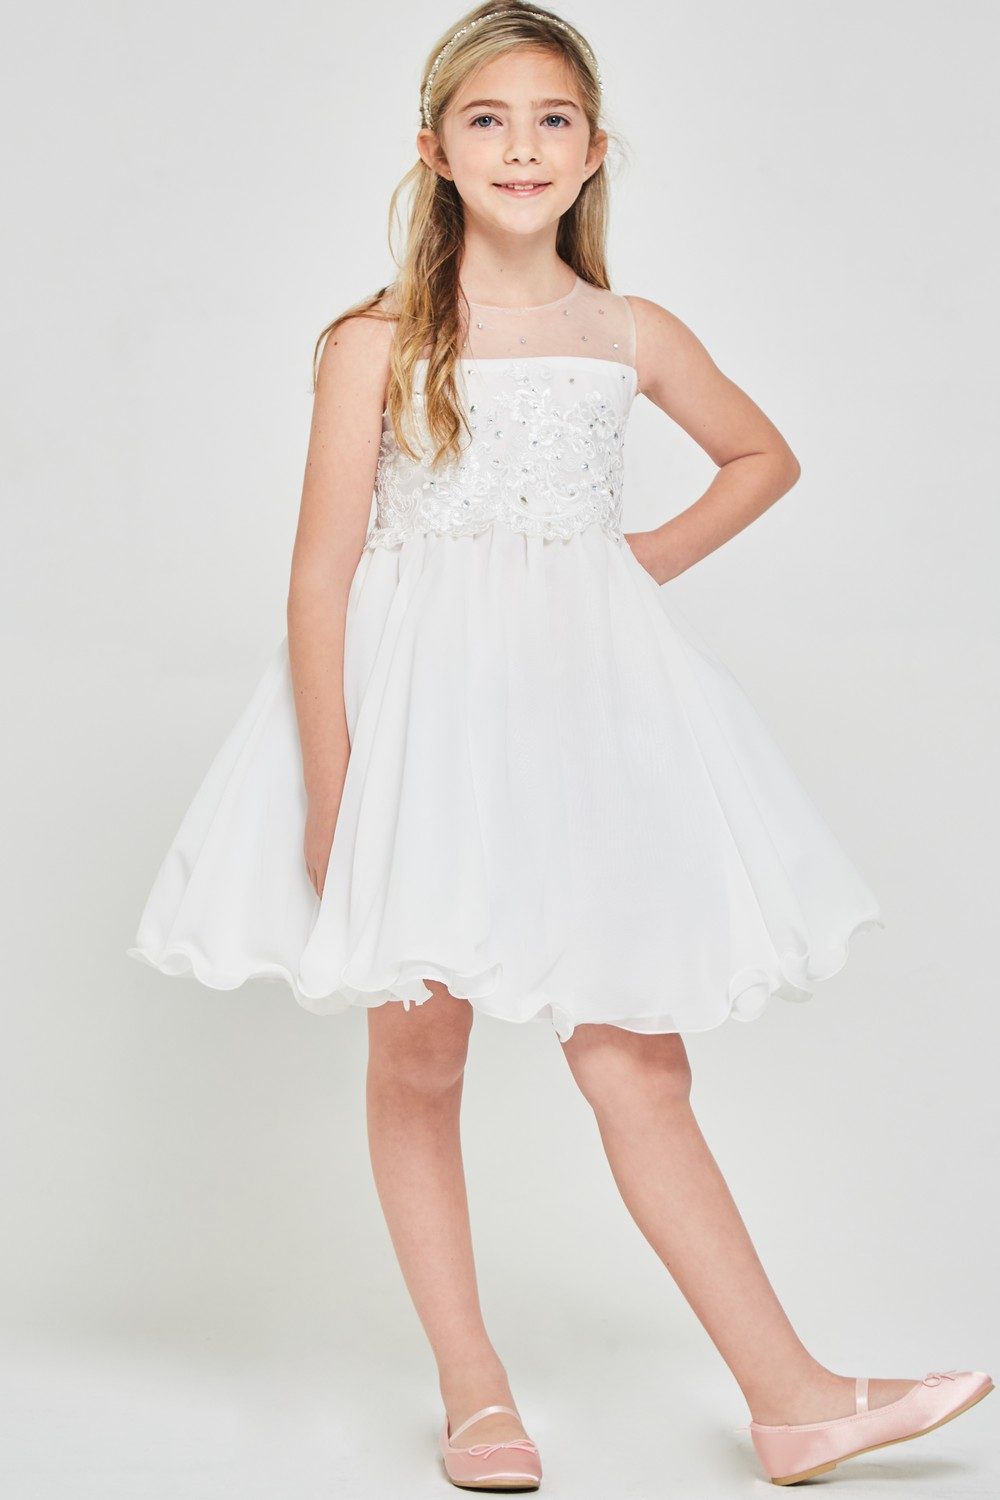 Girls Floral embroidered Chiffon First Communion Dress